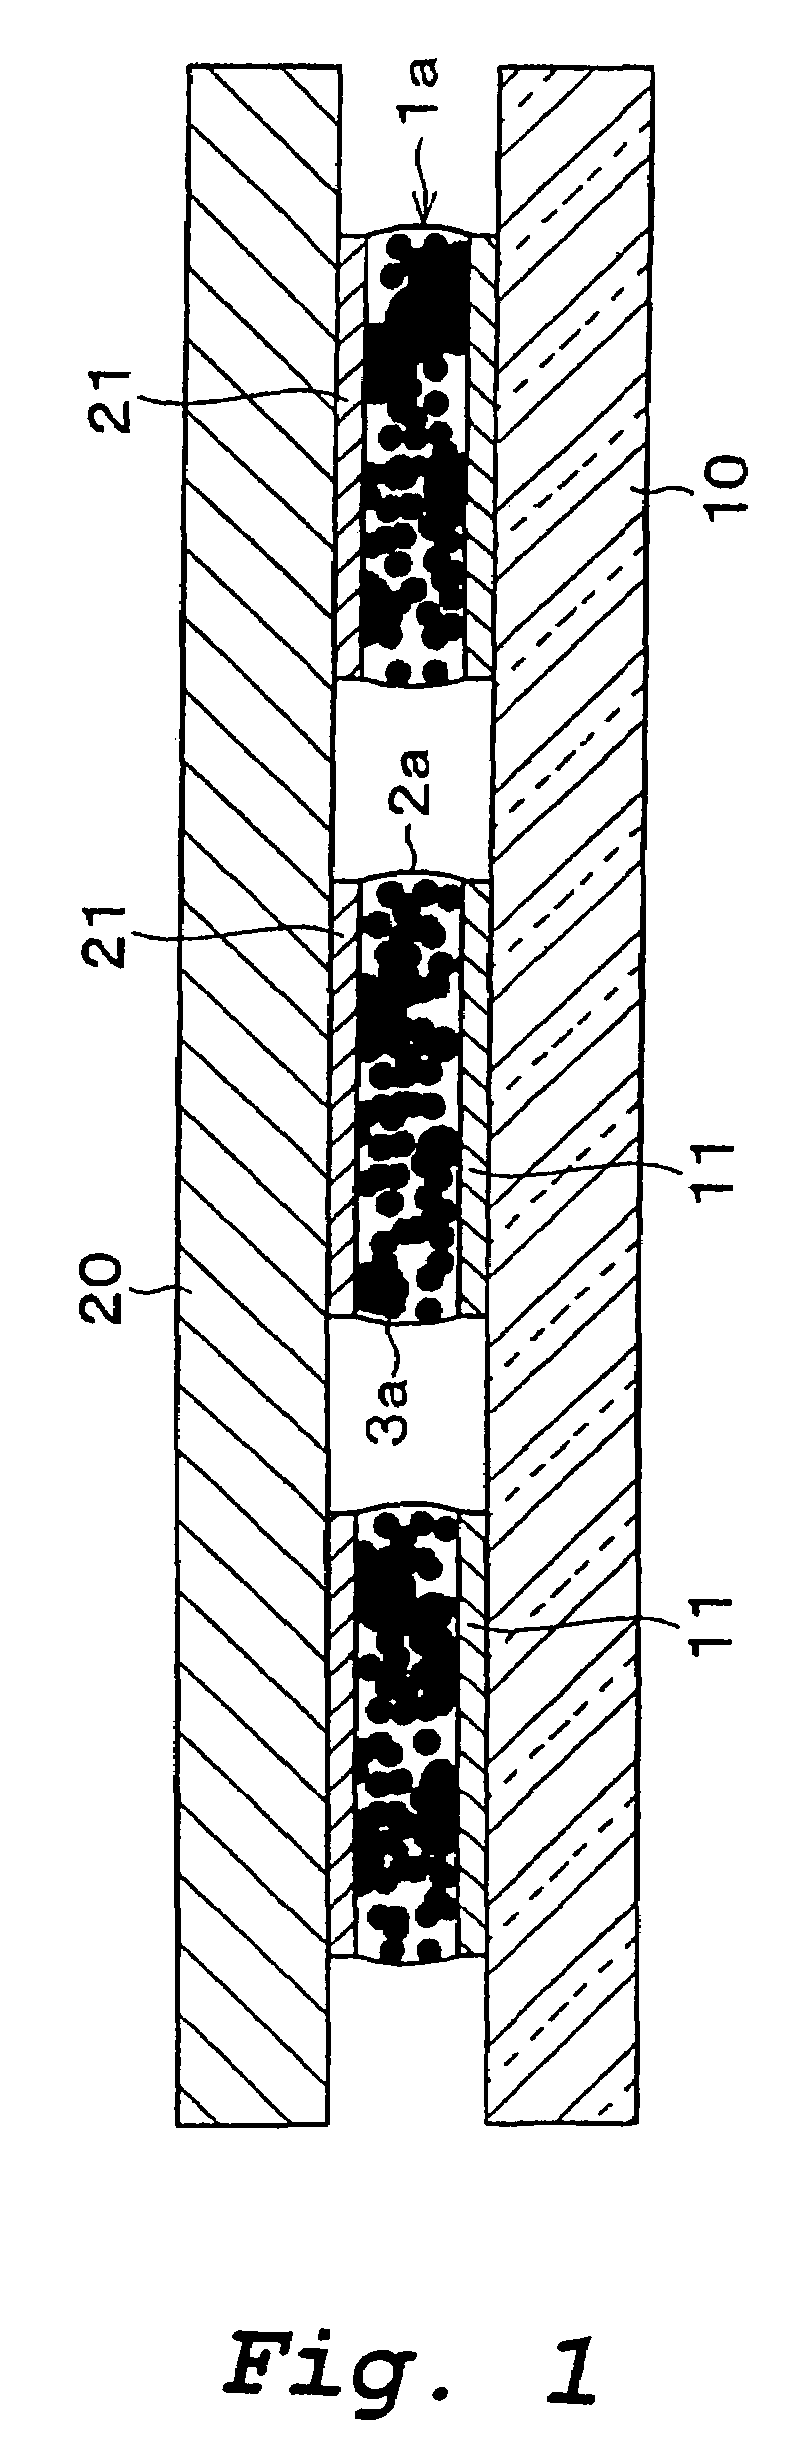 Method of interconnecting terminals and method of mounting semiconductor devices